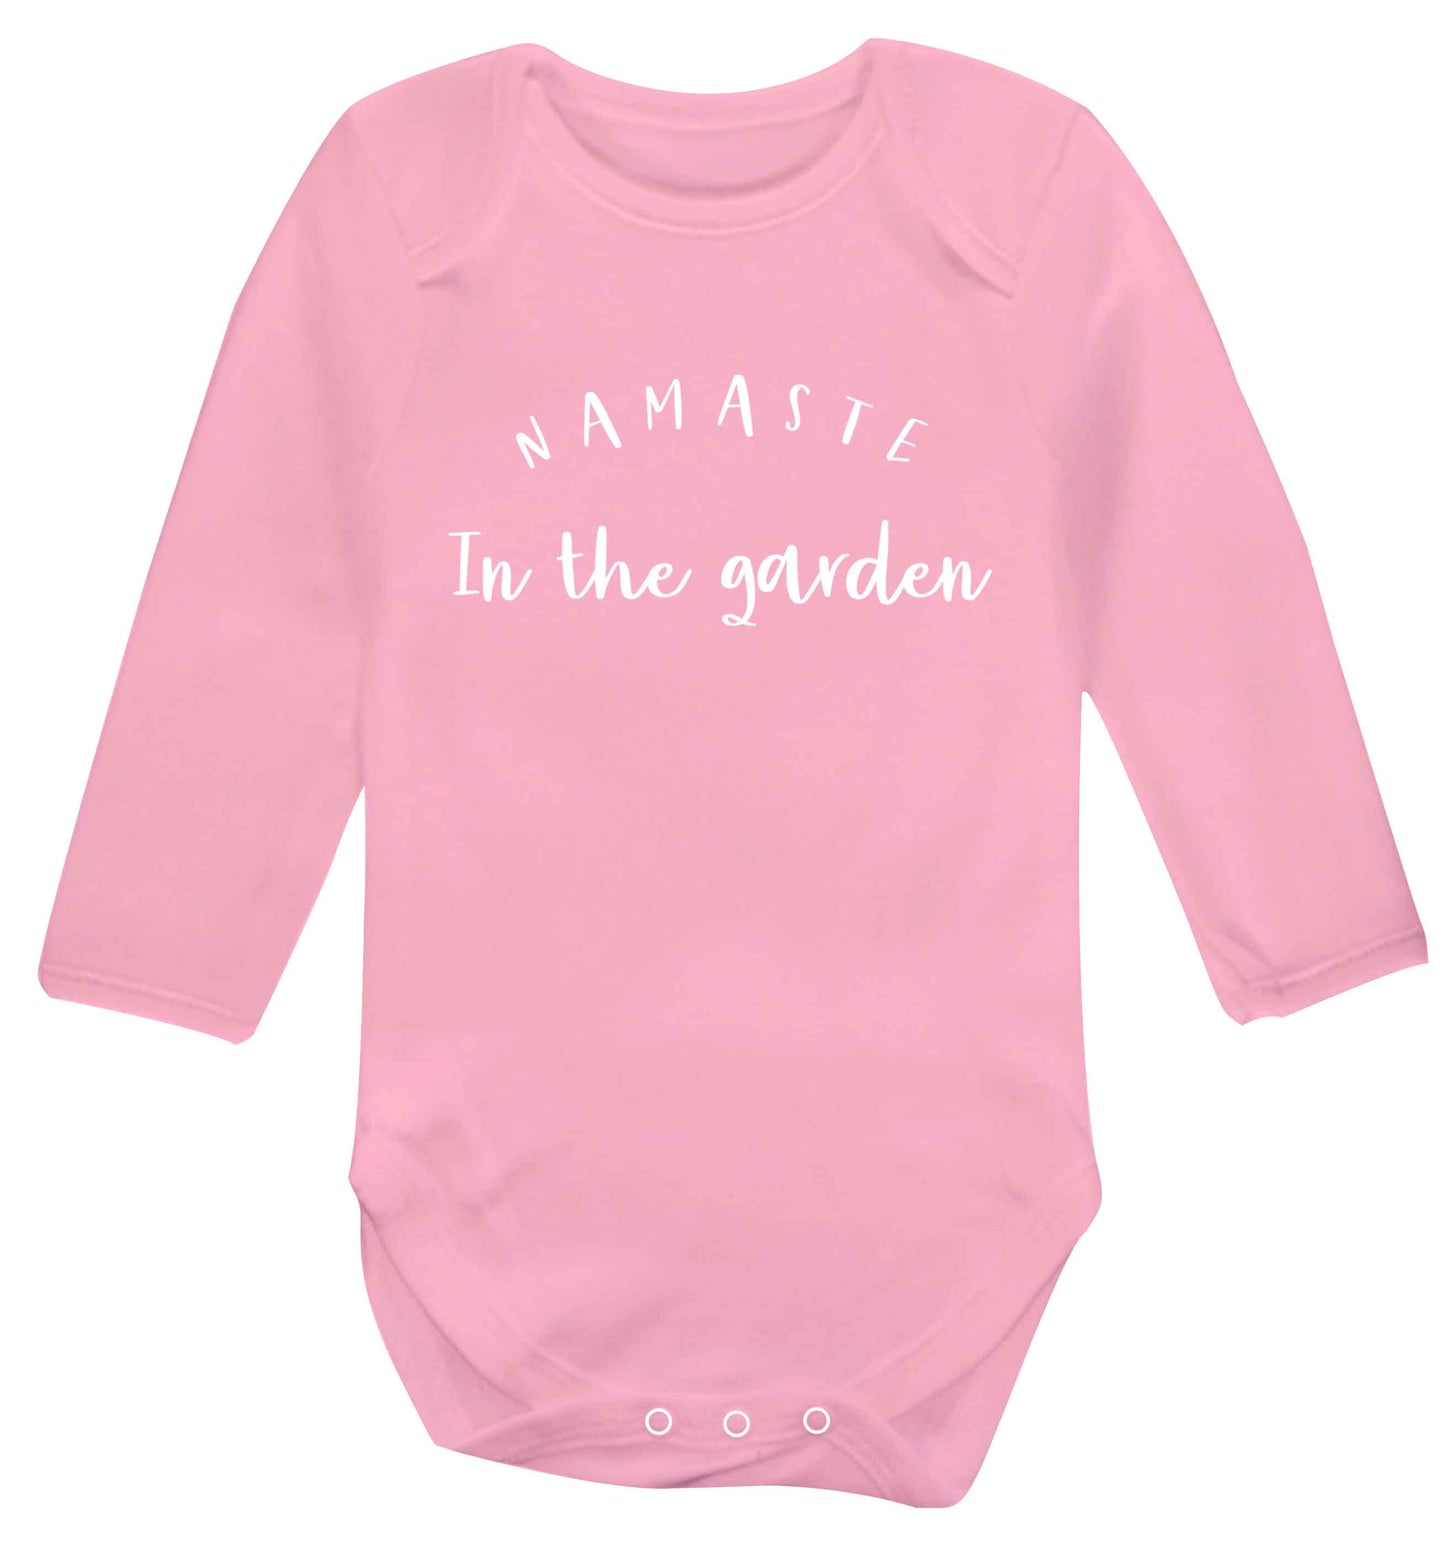 Namaste in the garden Baby Vest long sleeved pale pink 6-12 months